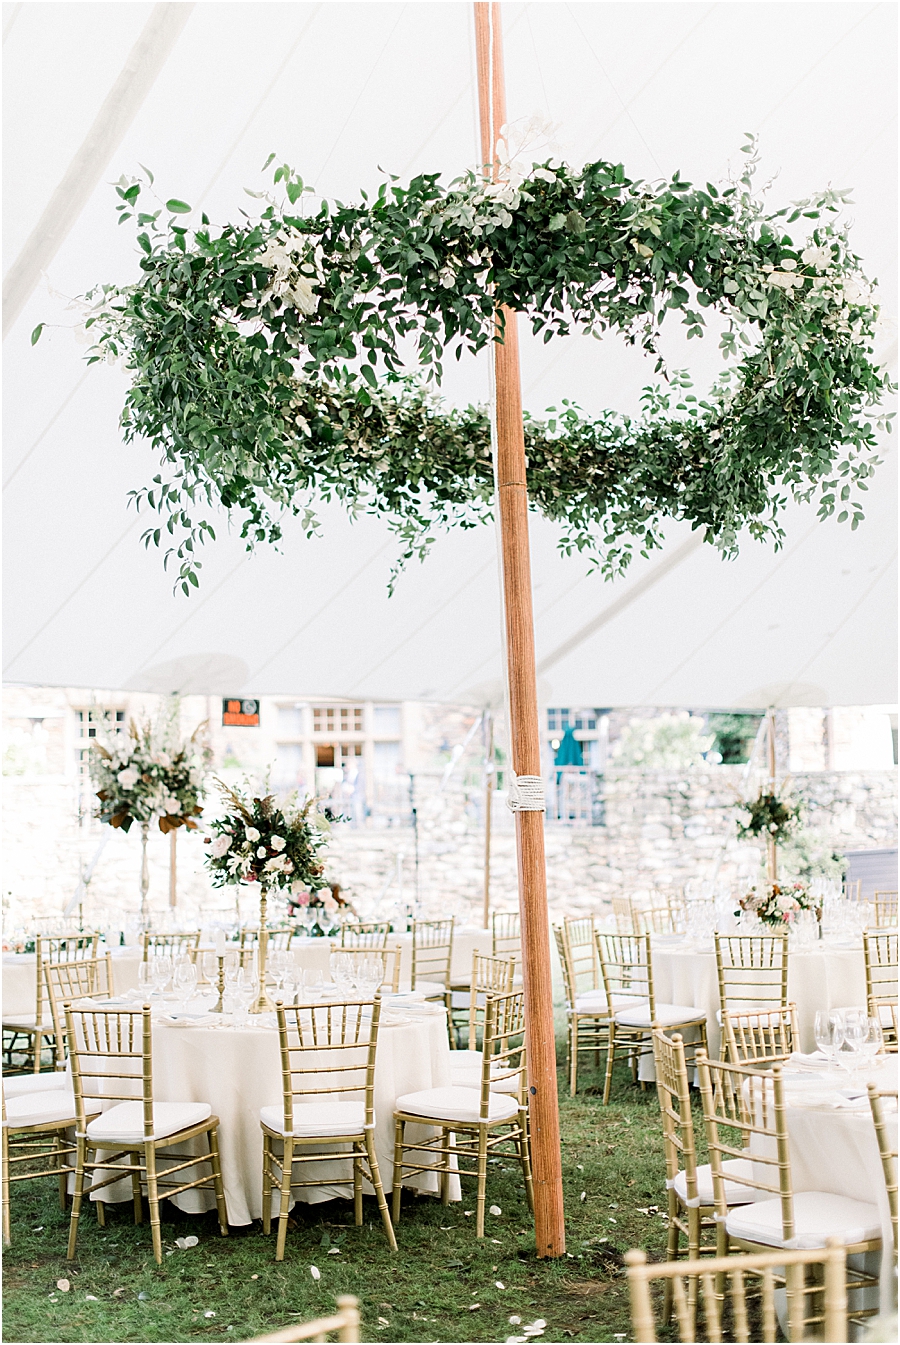 Graylyn Estate Wedding with a Reception under a Sailcloth Tent | by Winston Salem Film Photographer Hillary Muelleck